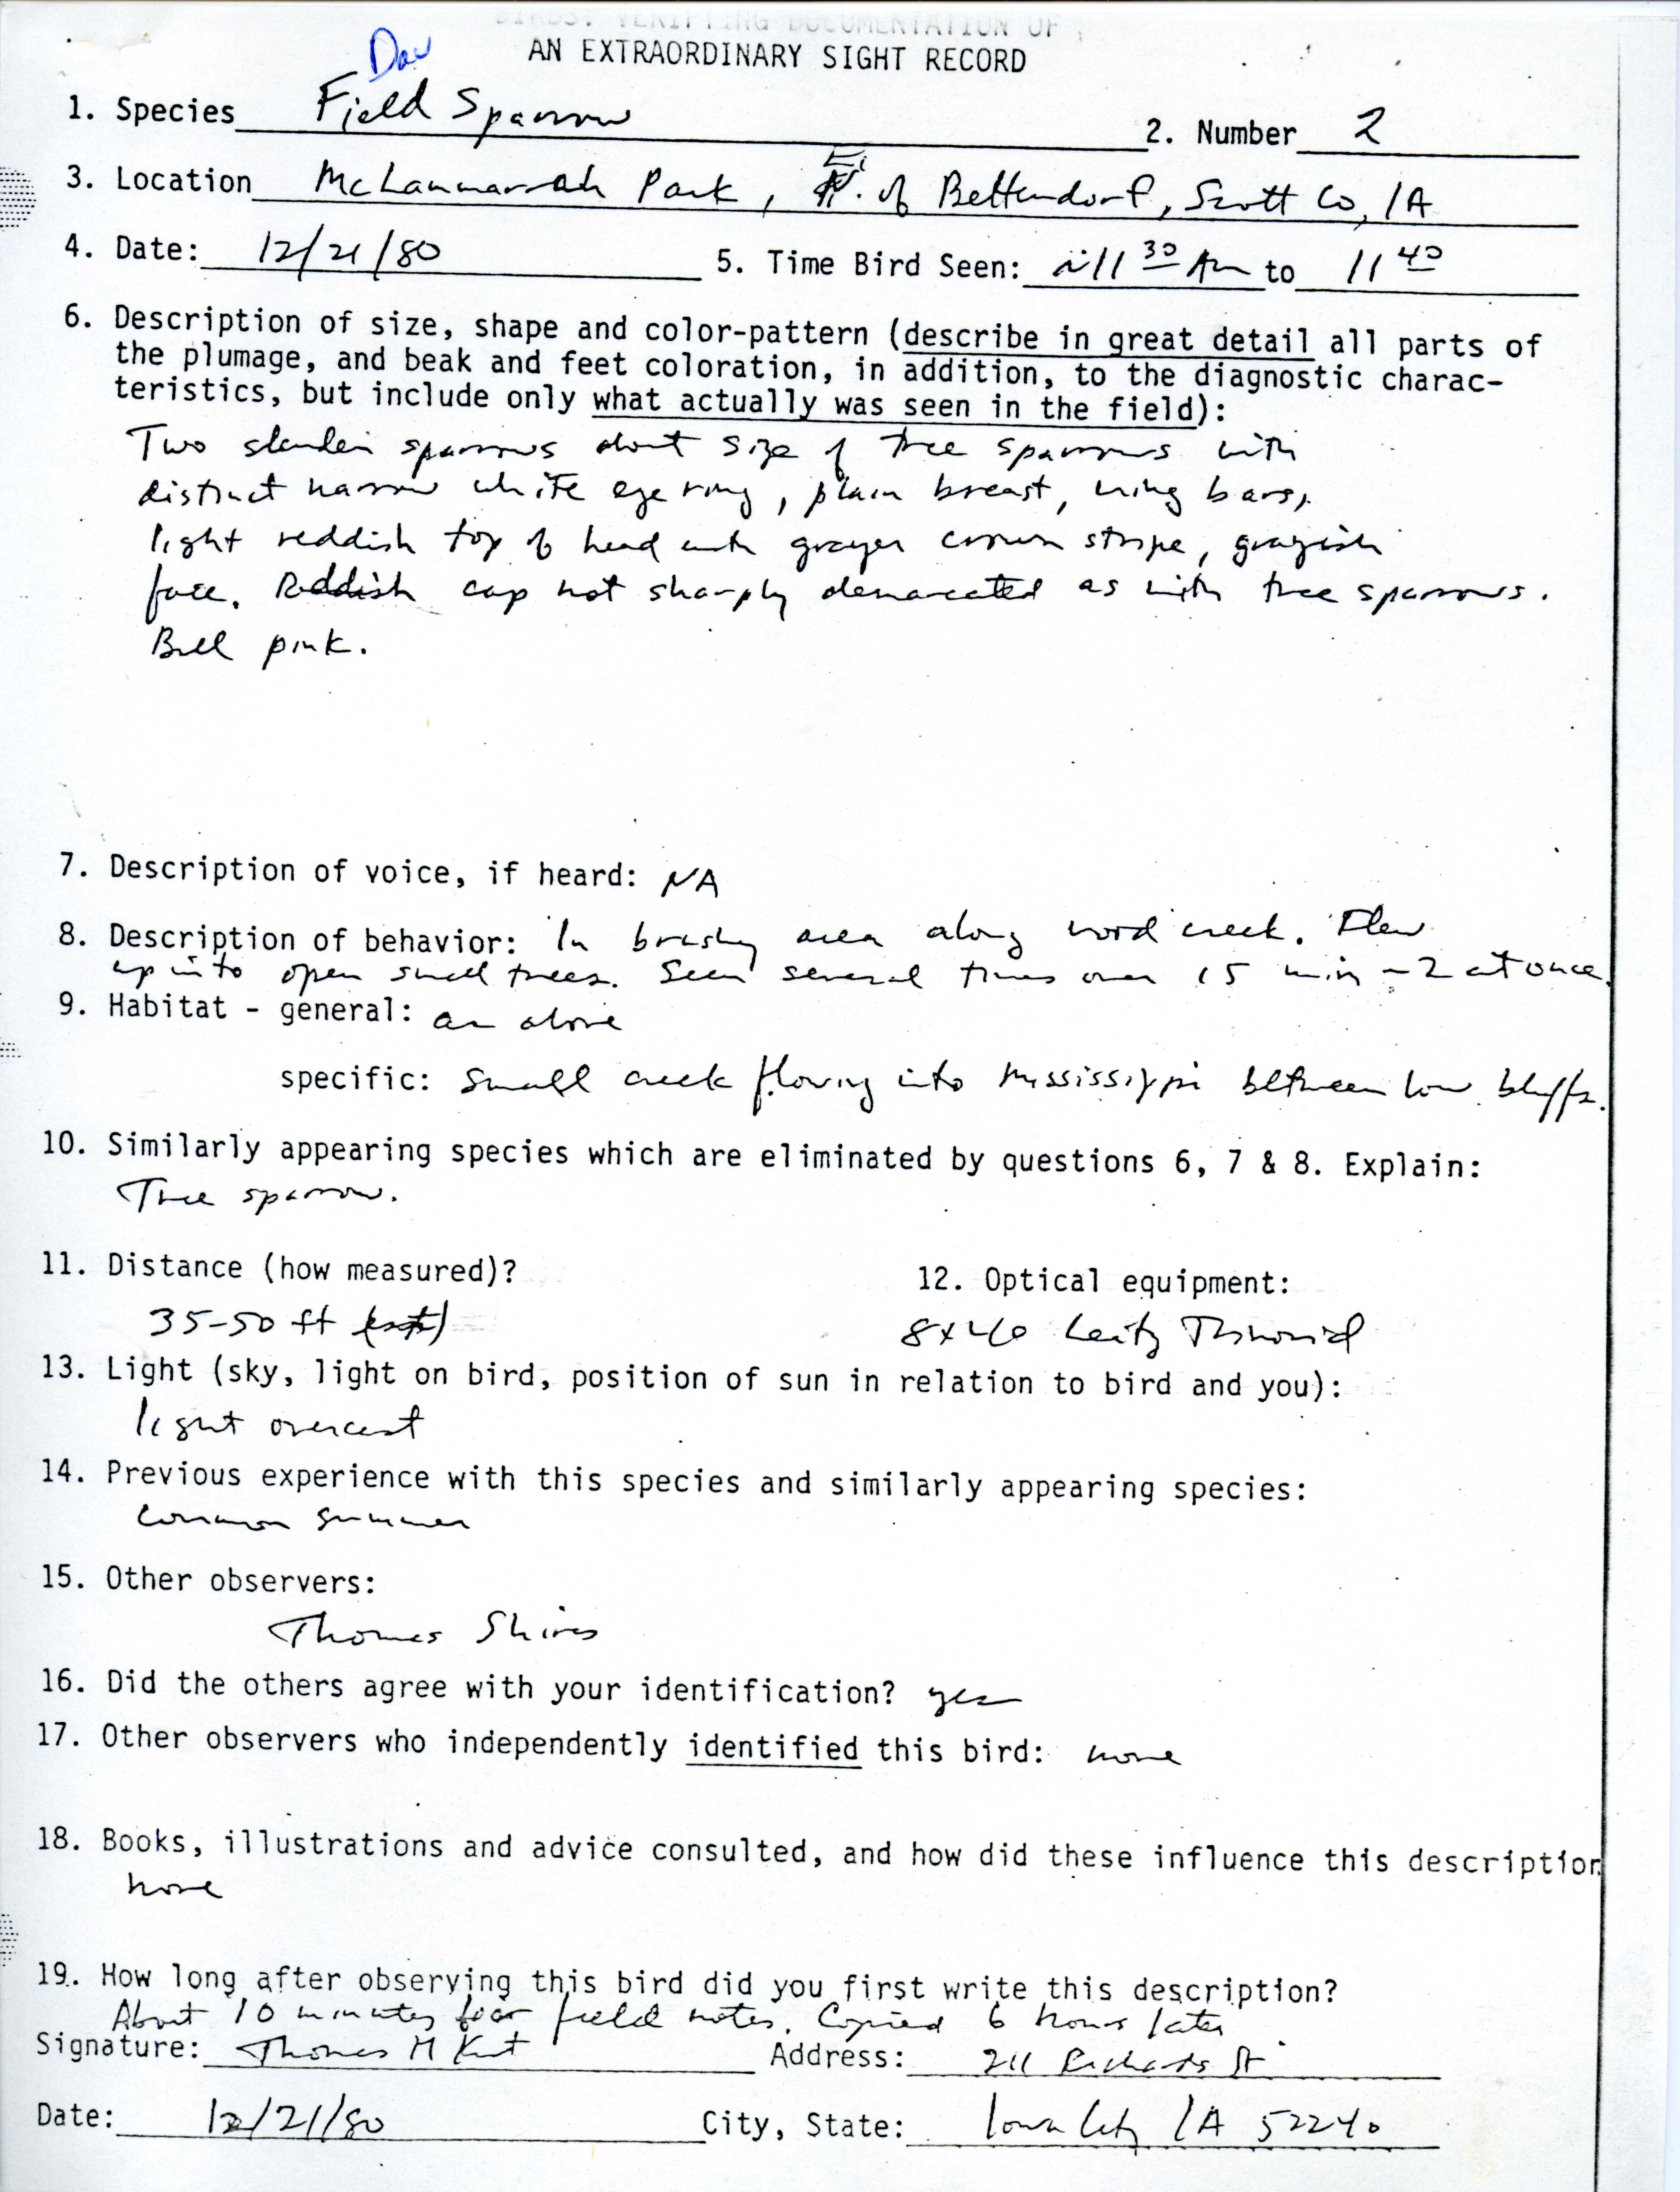 Verifying documentation form for Field Sparrow sighting submitted by Thomas H. Kent, December 21 1980